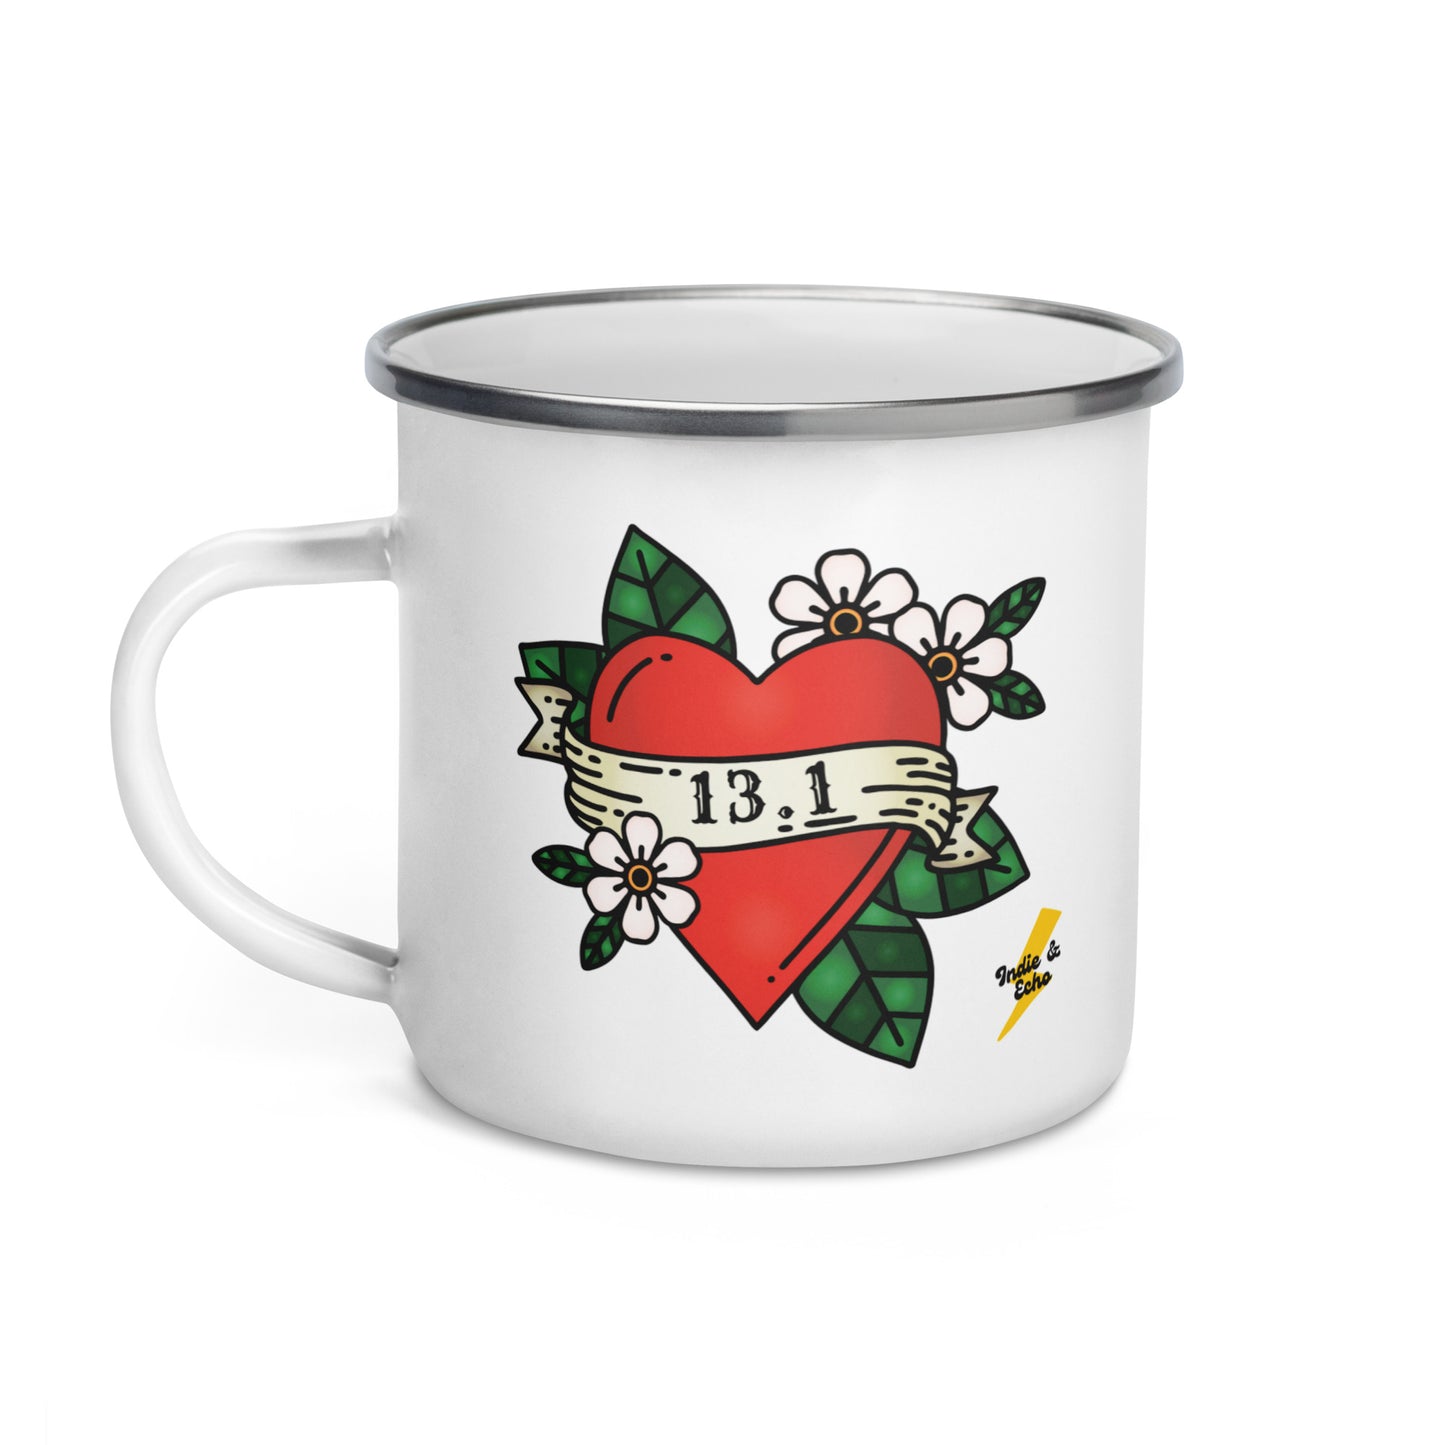 white enamel mug with a love heart and flower traditional tattoo design, with 13.1 half marathon distance in a scroll across the front